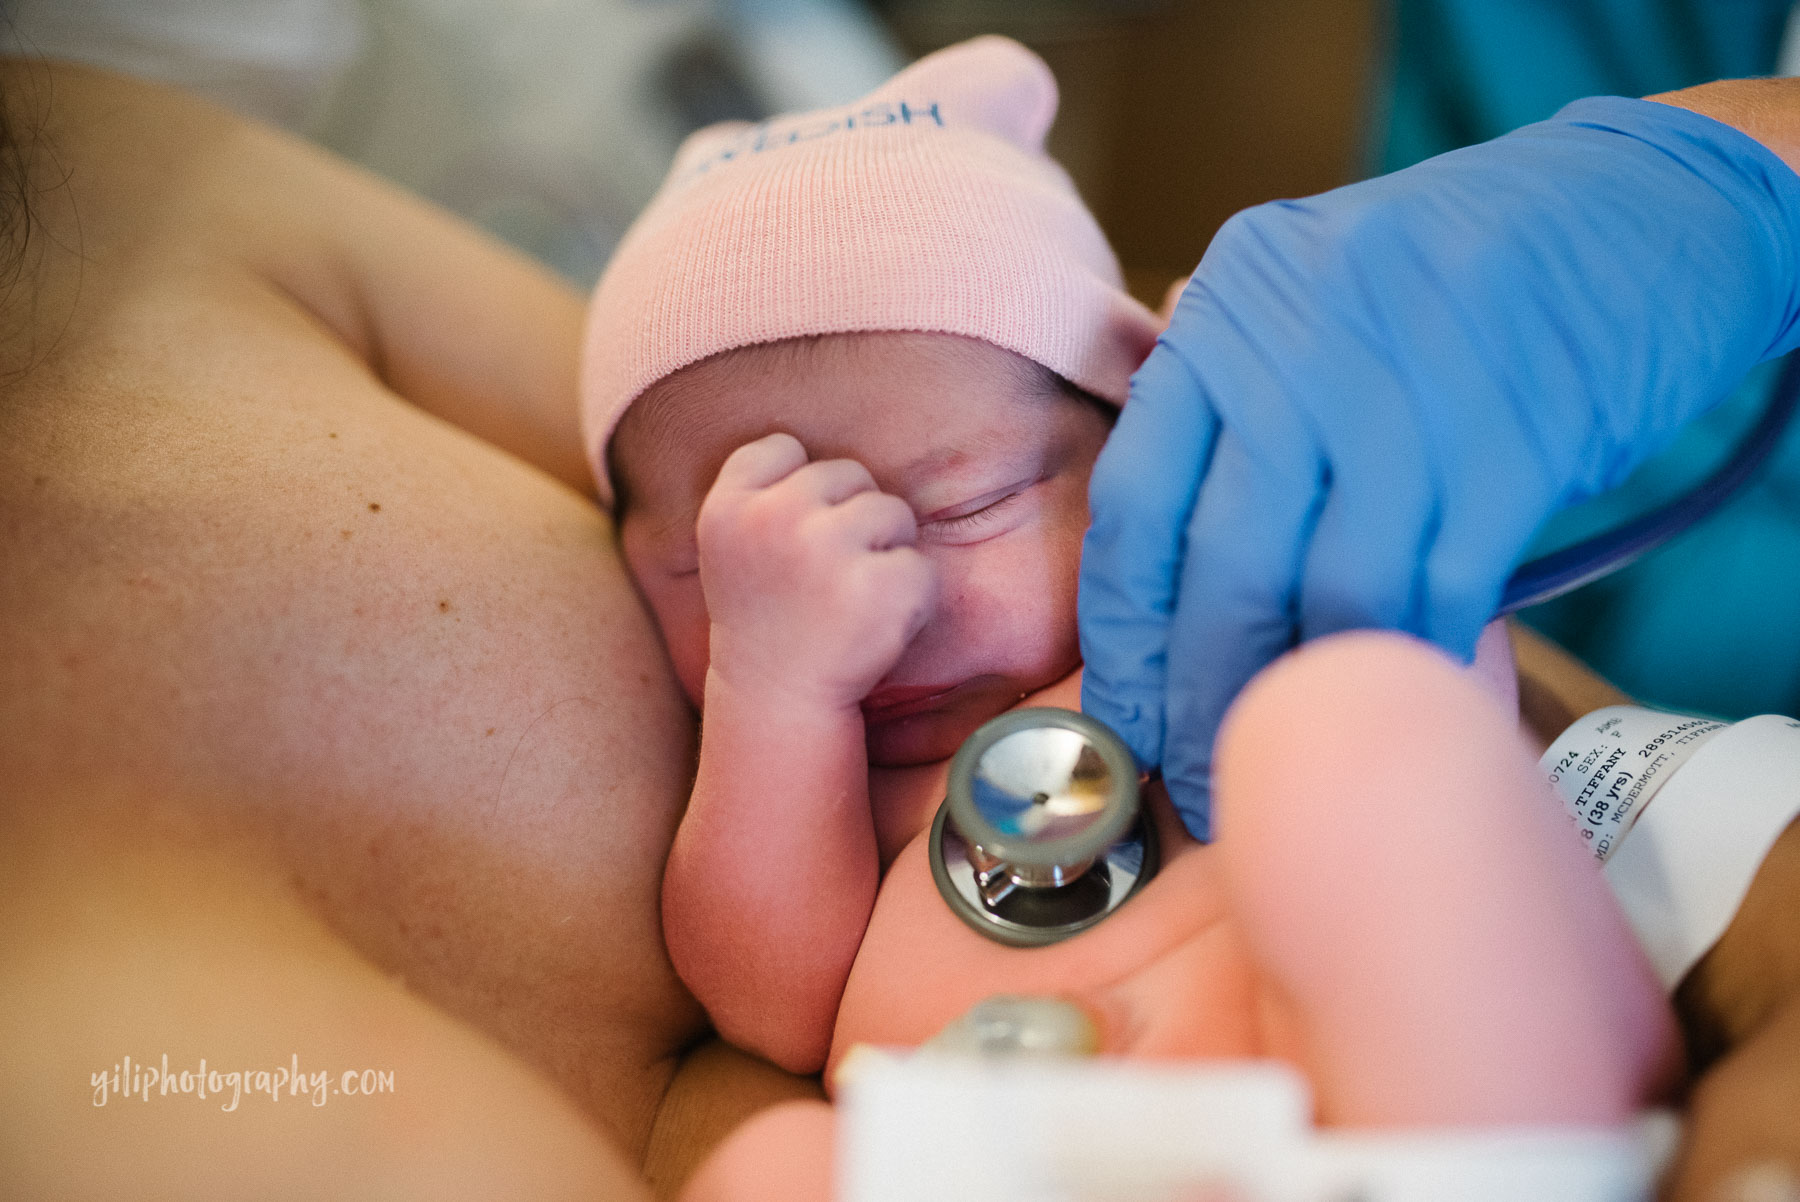 newborn baby on mom's chest being examined with stethescope